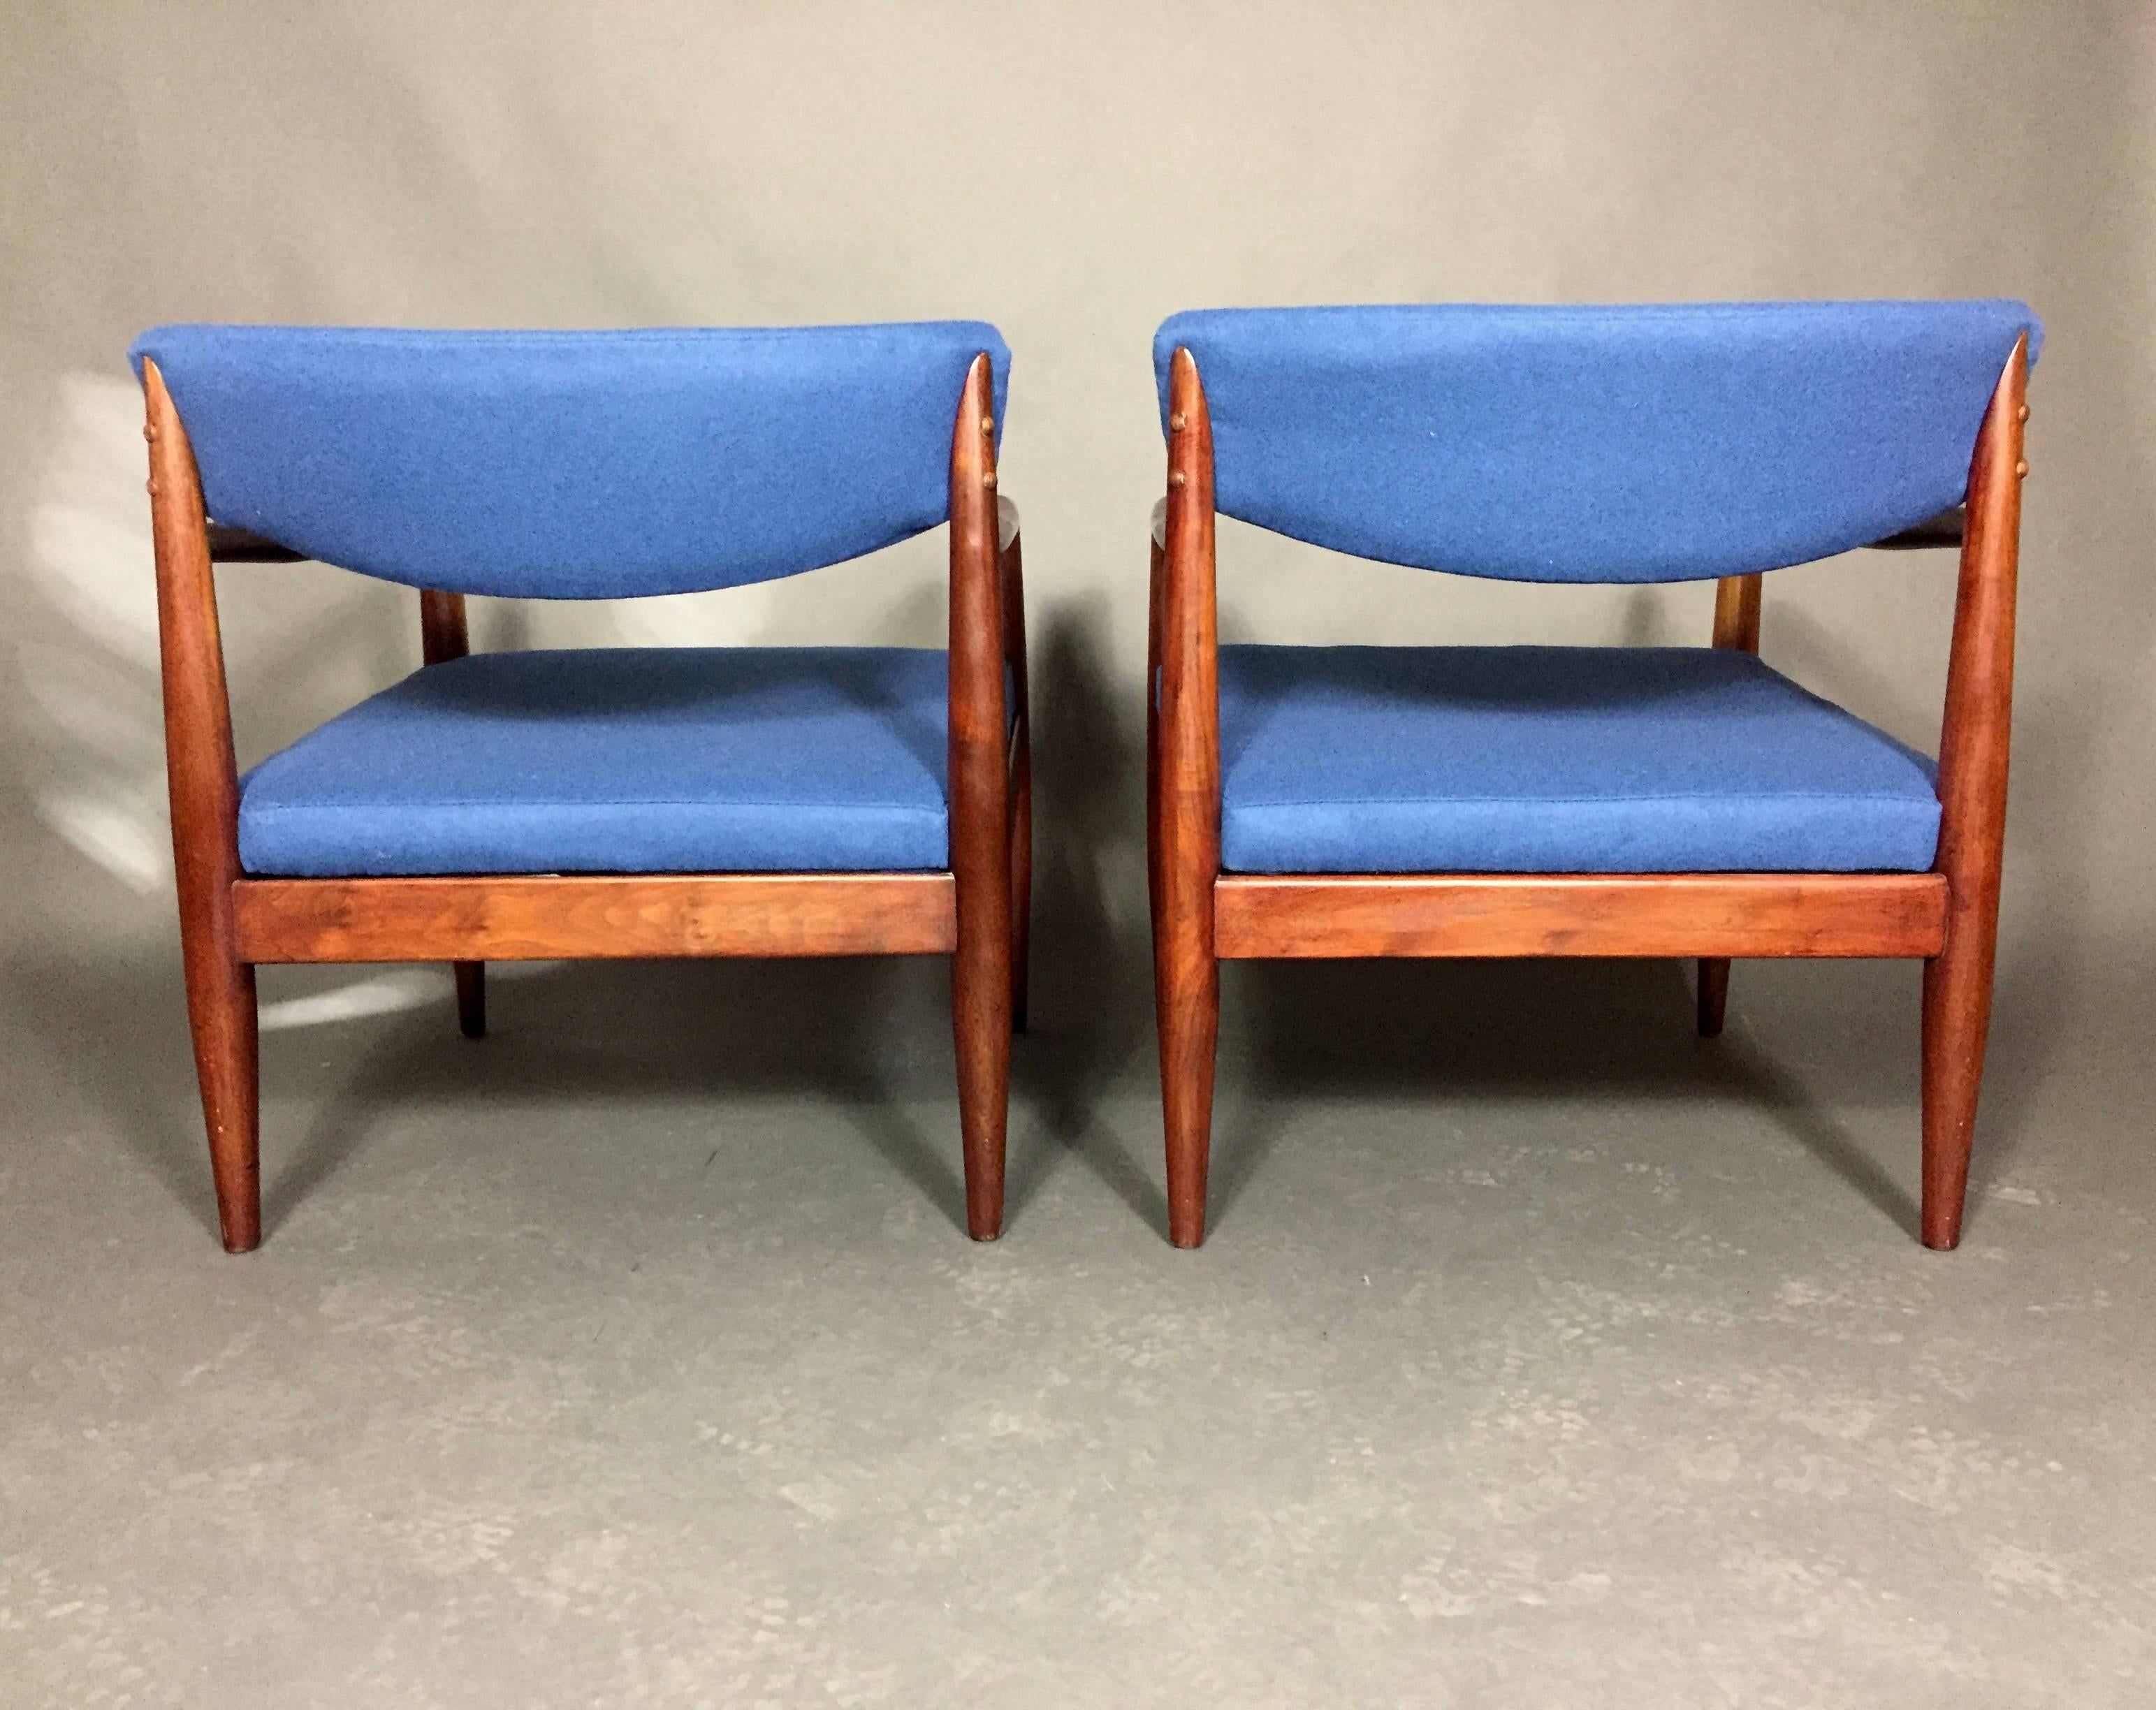 Mid-20th Century Pair of Adrian Pearsall Upholstered Lounge Chairs, USA, 1960s